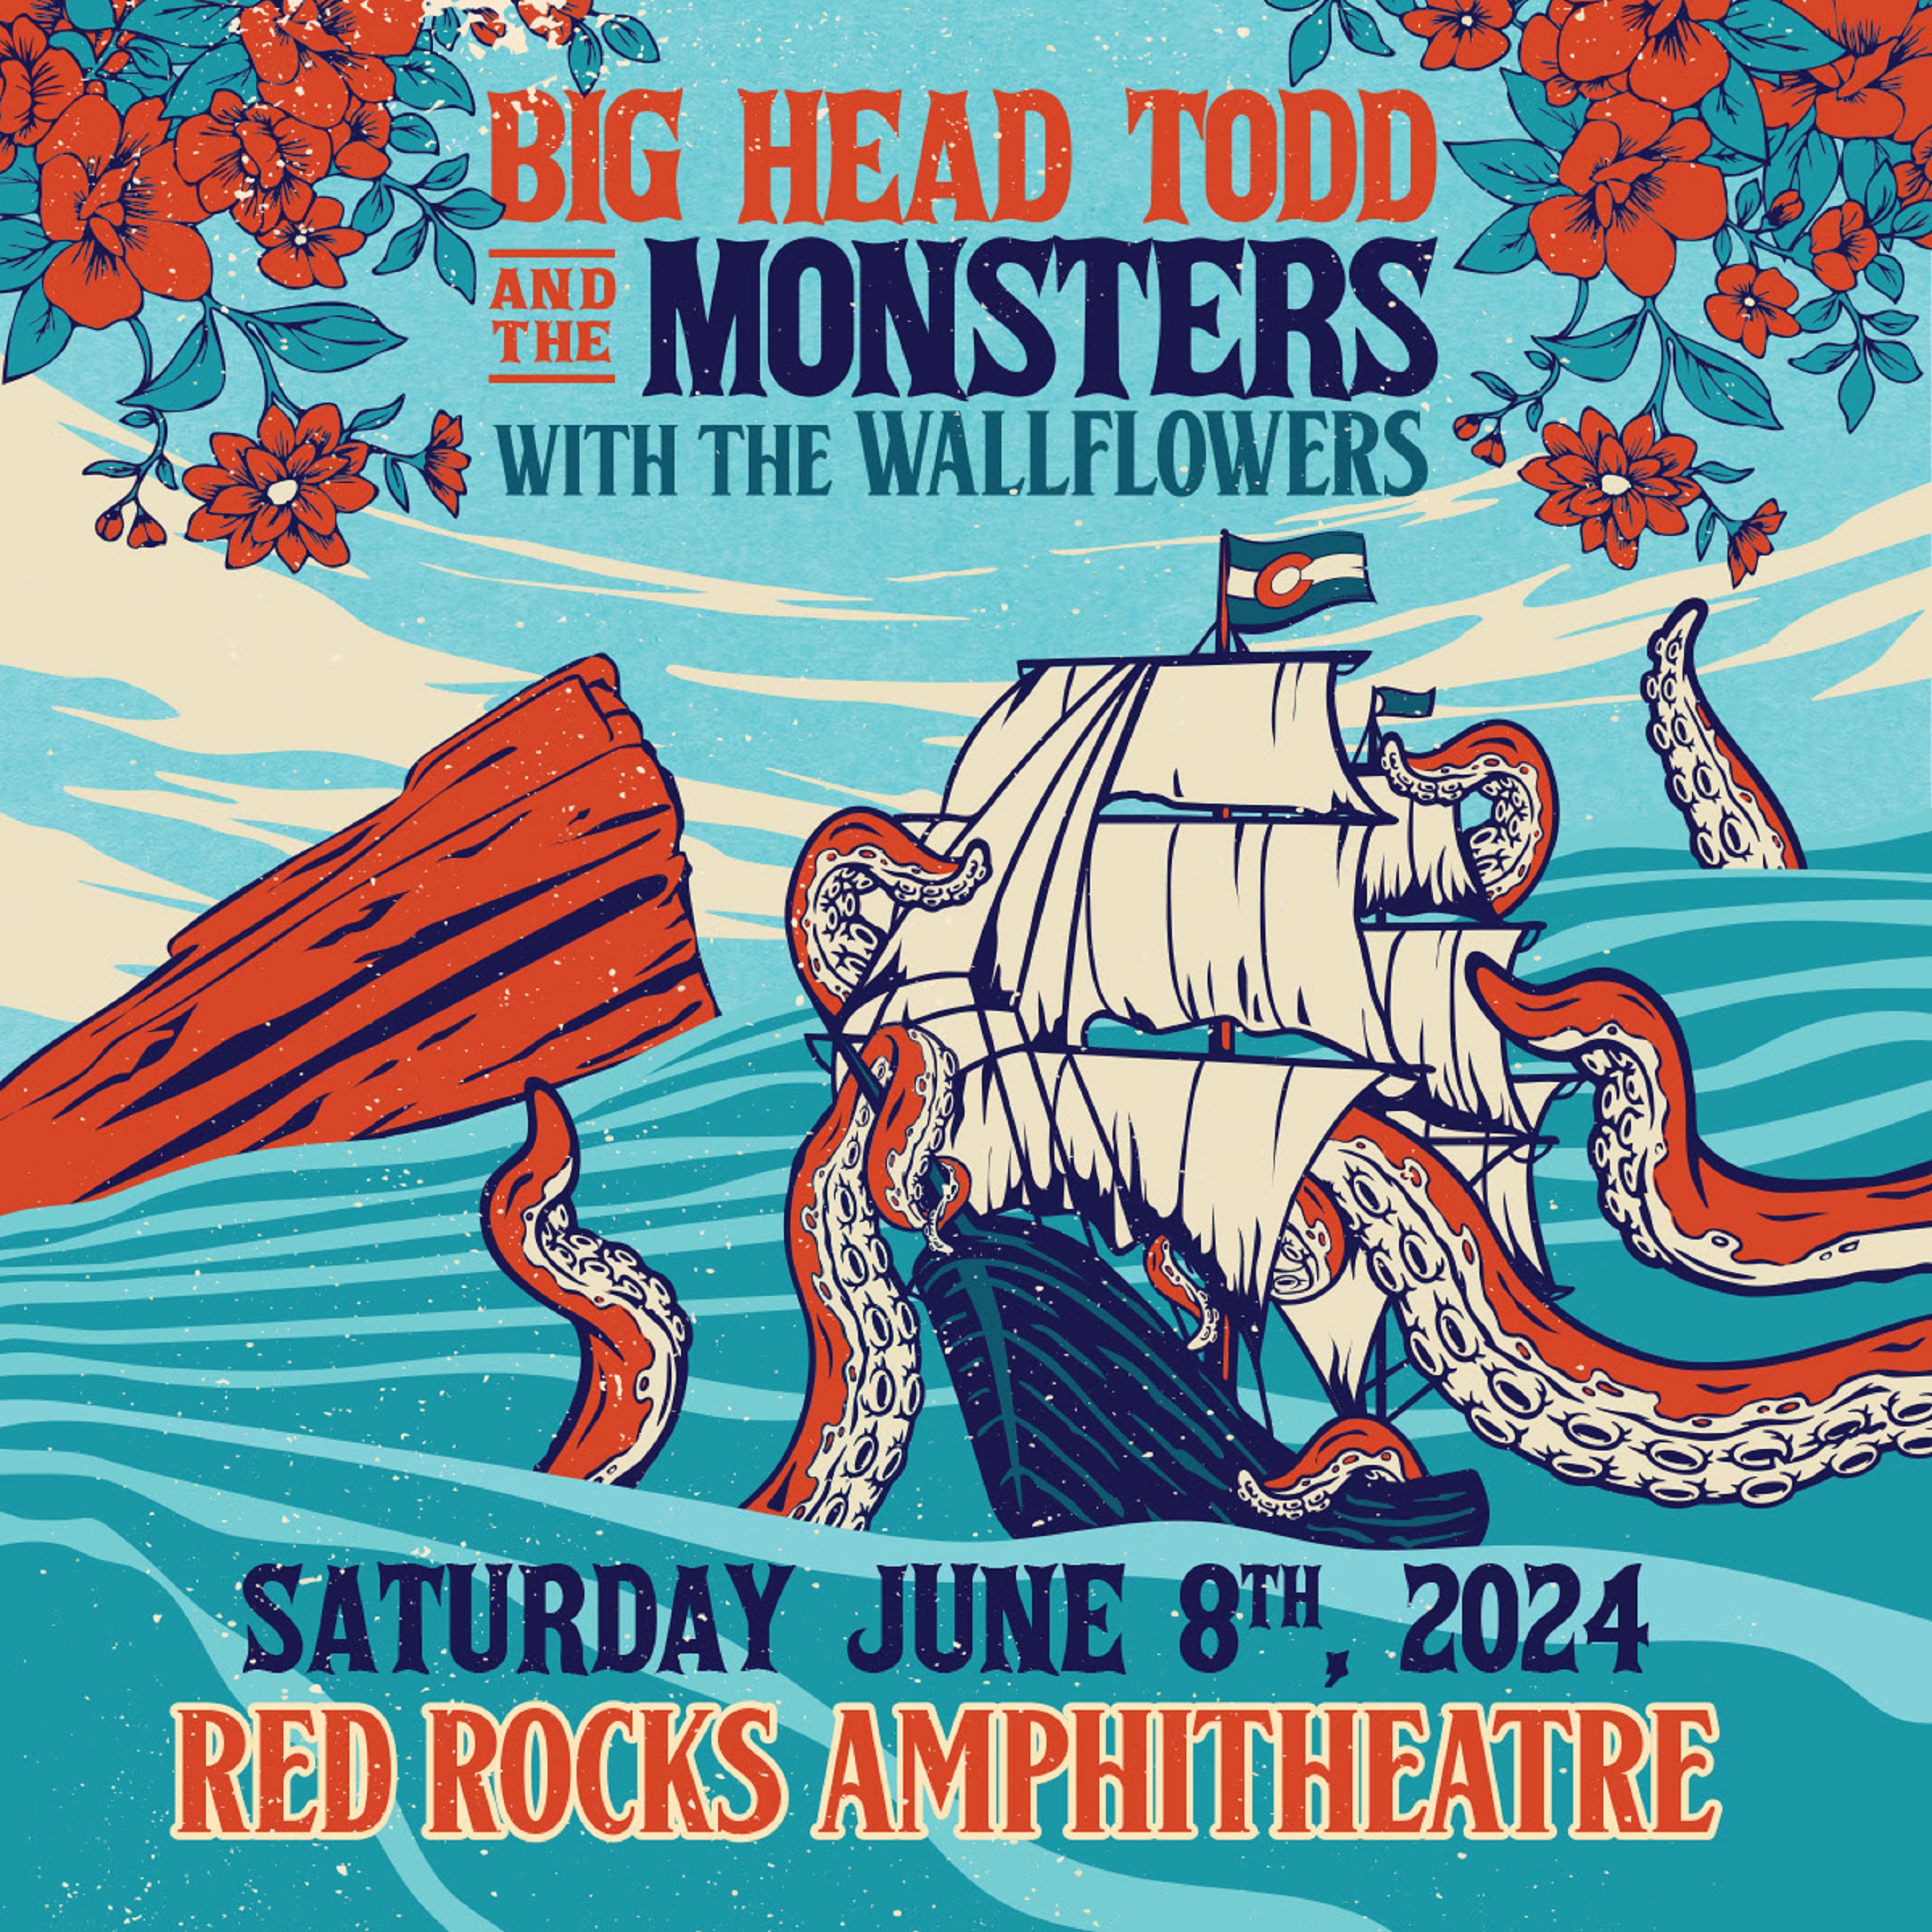 BIG HEAD TODD & THE MONSTERS ANNOUNCE ANNUAL RED ROCKS SHOW - JUNE 8, 2024 WITH THE WALLFLOWERS